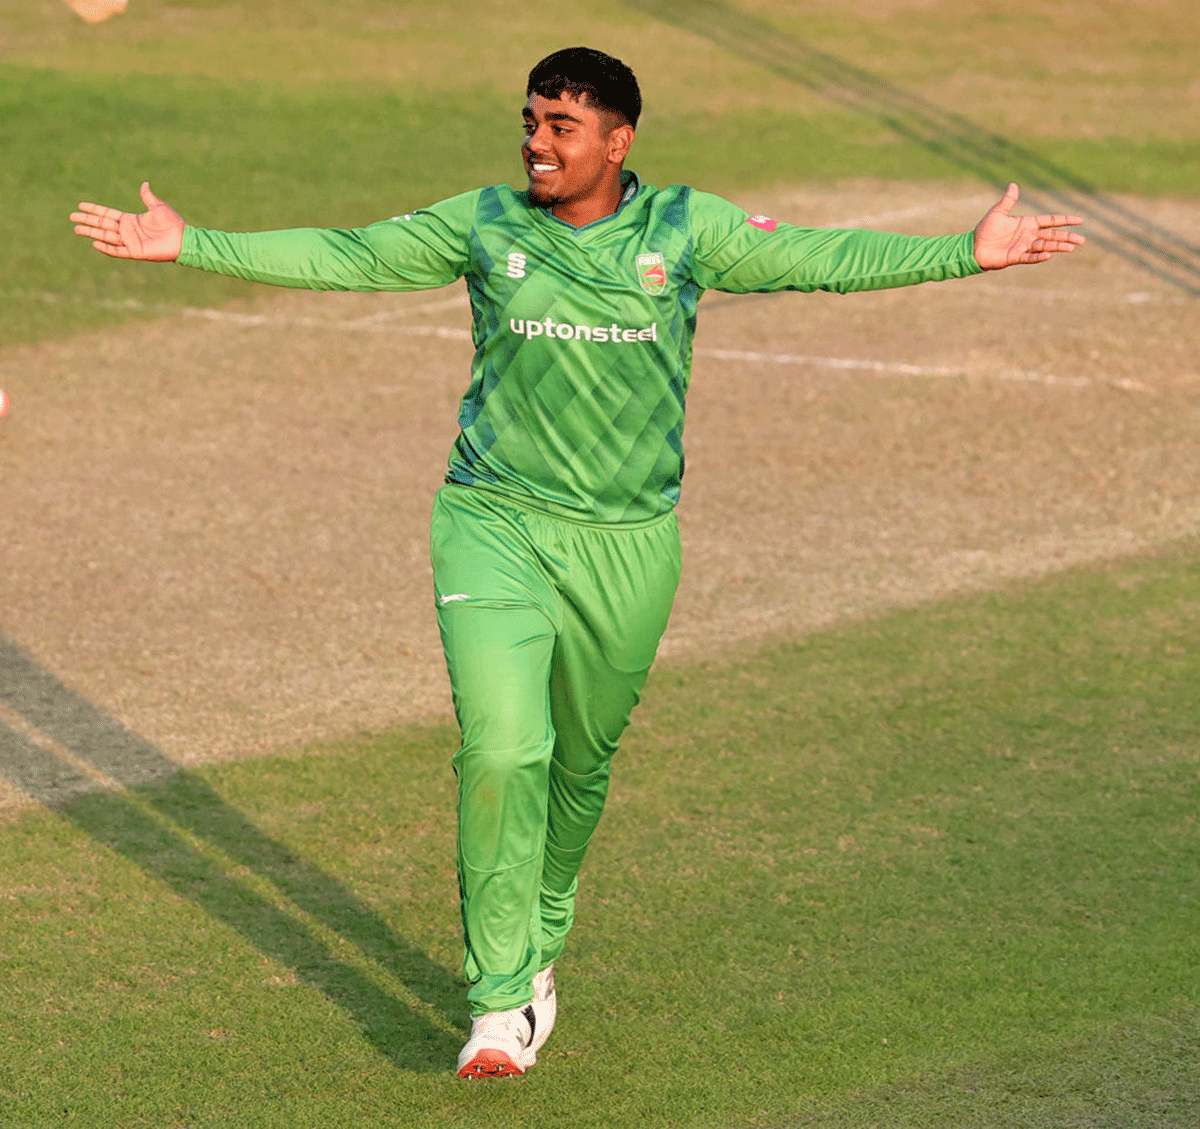 Leicestershire's England under-19 international Rehan Ahmed is 18 and 102 days and will become the youngest to represent England if picked for the opening Test in Pakistan